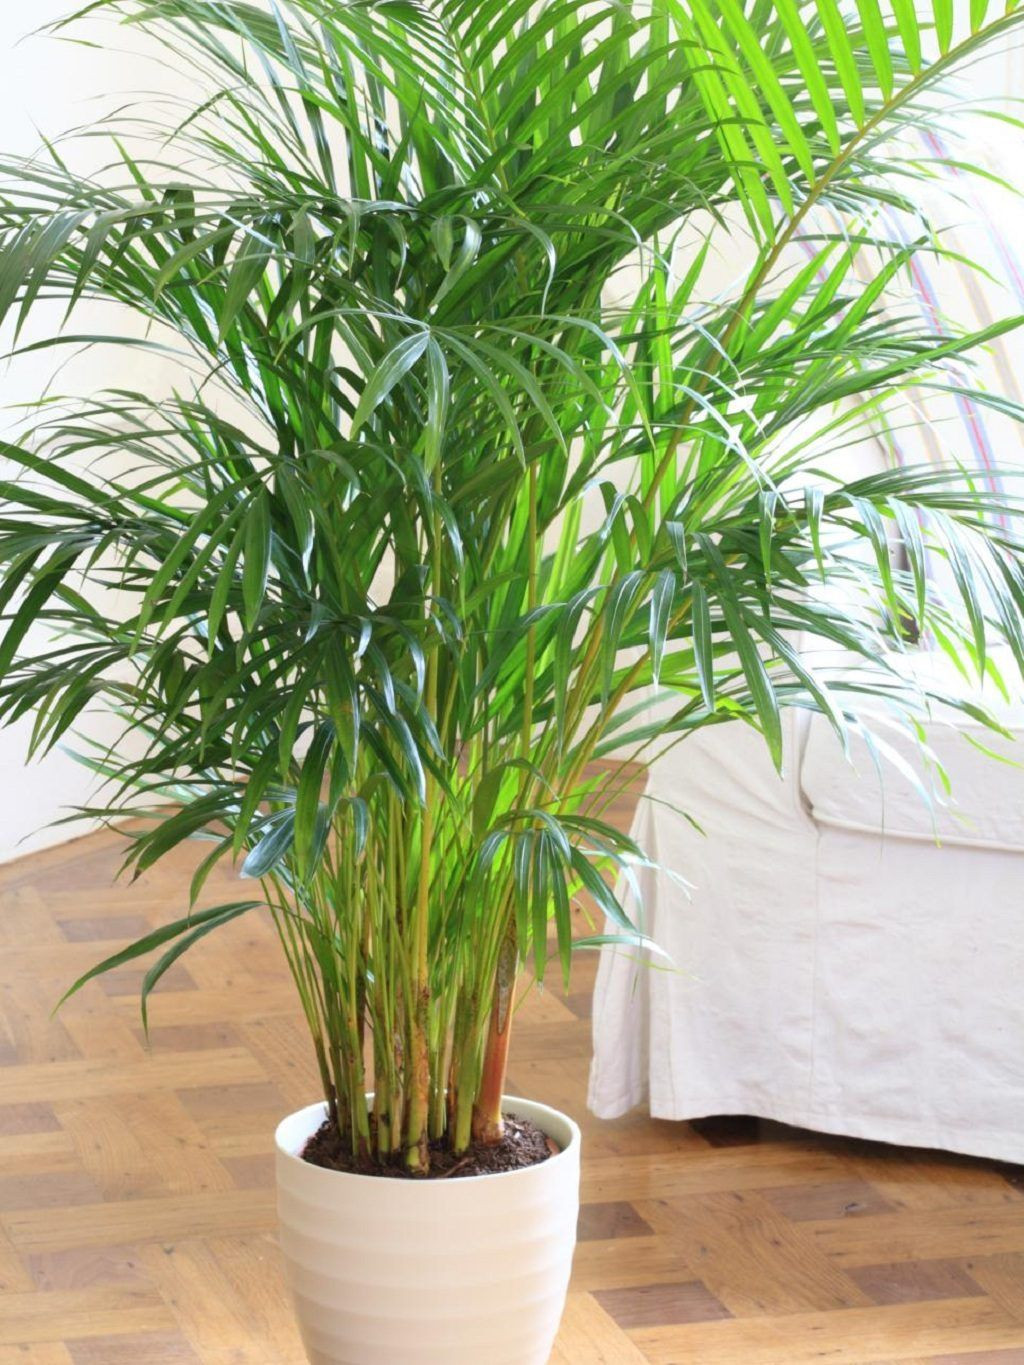 Bedroom Plants Low Light
 Bamboo palm bedroom plant relaxing indoor plant air